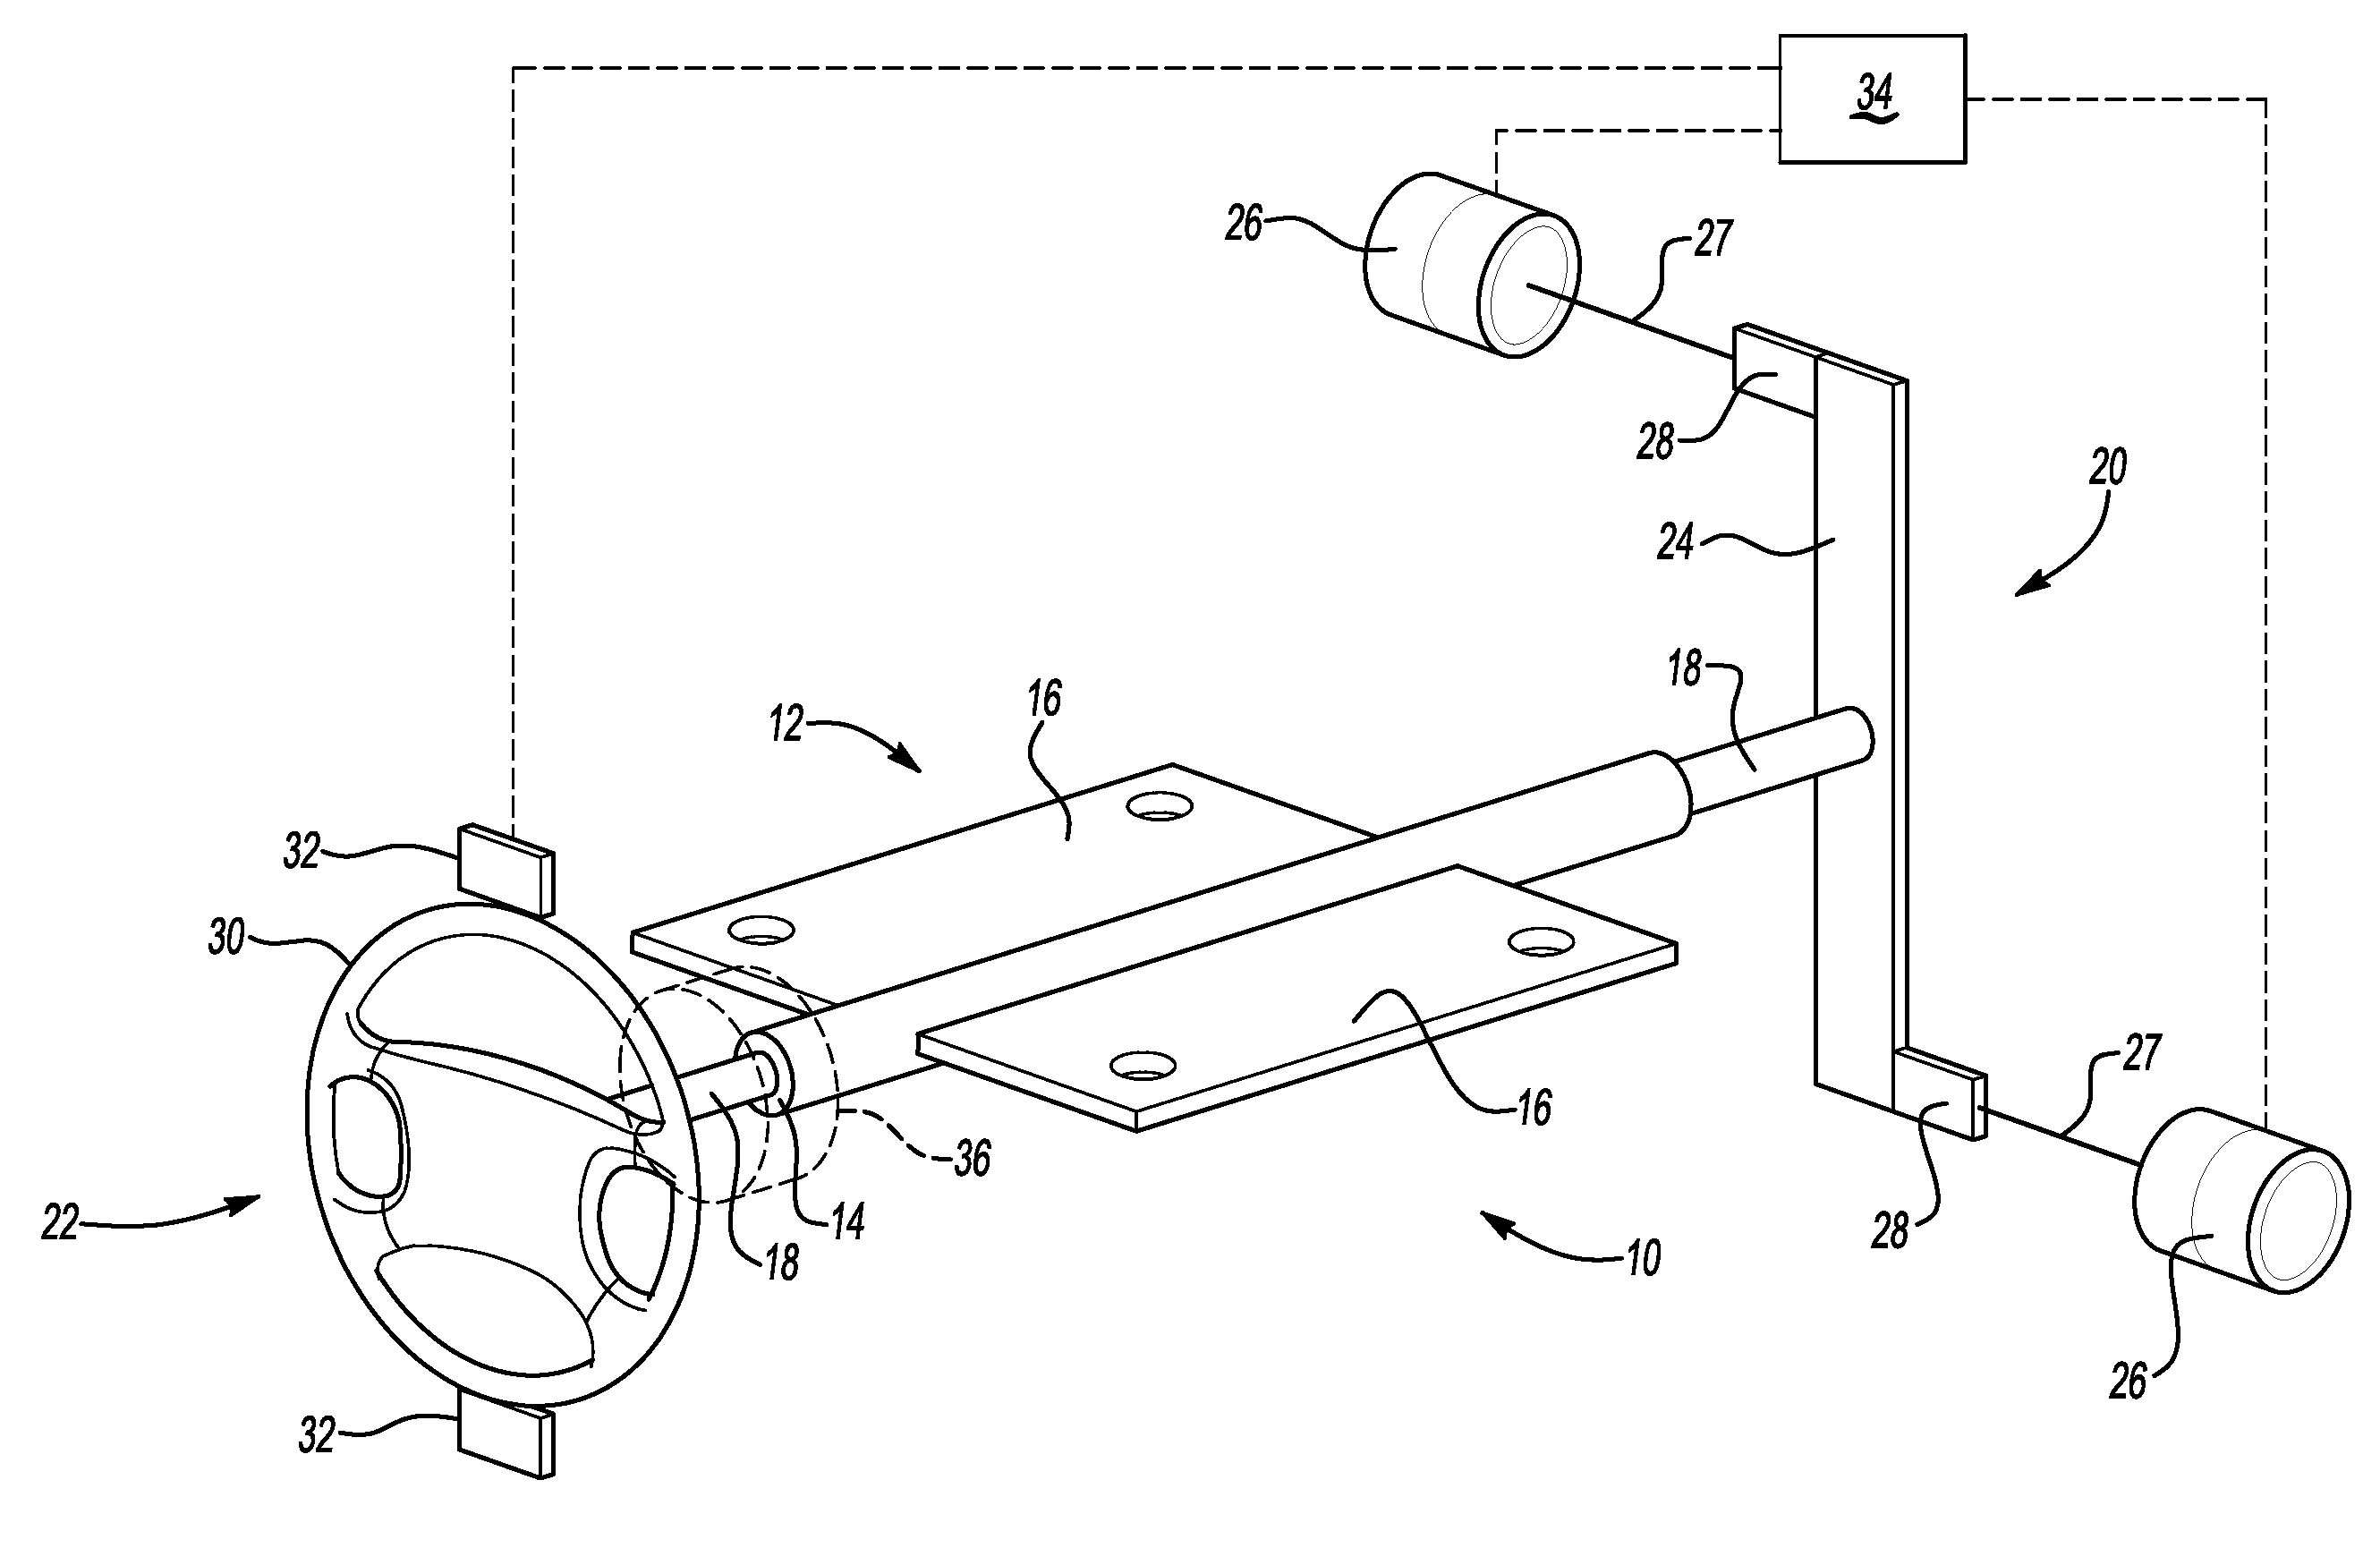 Method of measuring torsional dynamics of a steering column at small dynamic amplitudes